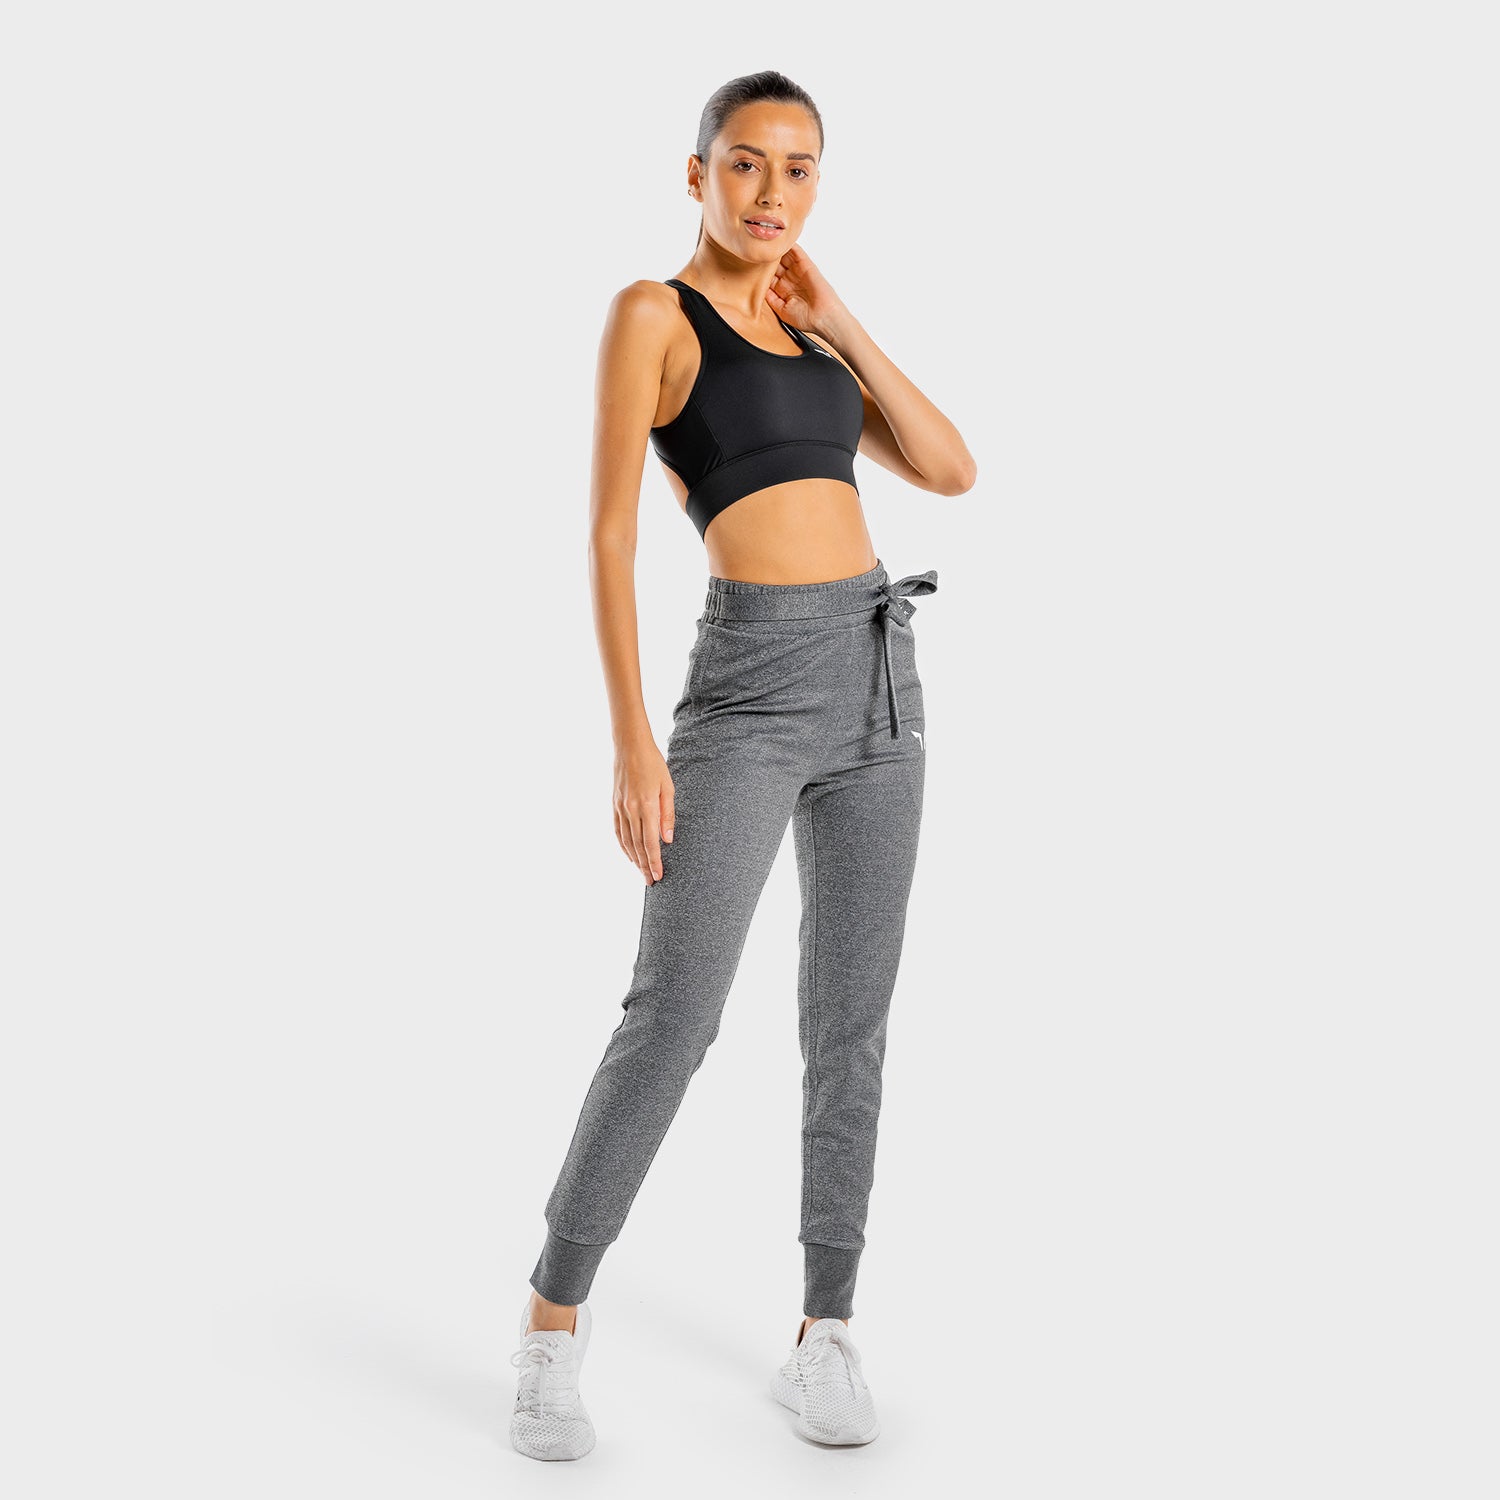 squatwolf-gym-pants-for-women-she-wolf-do-knot-joggers-charcoal-workout-clothes